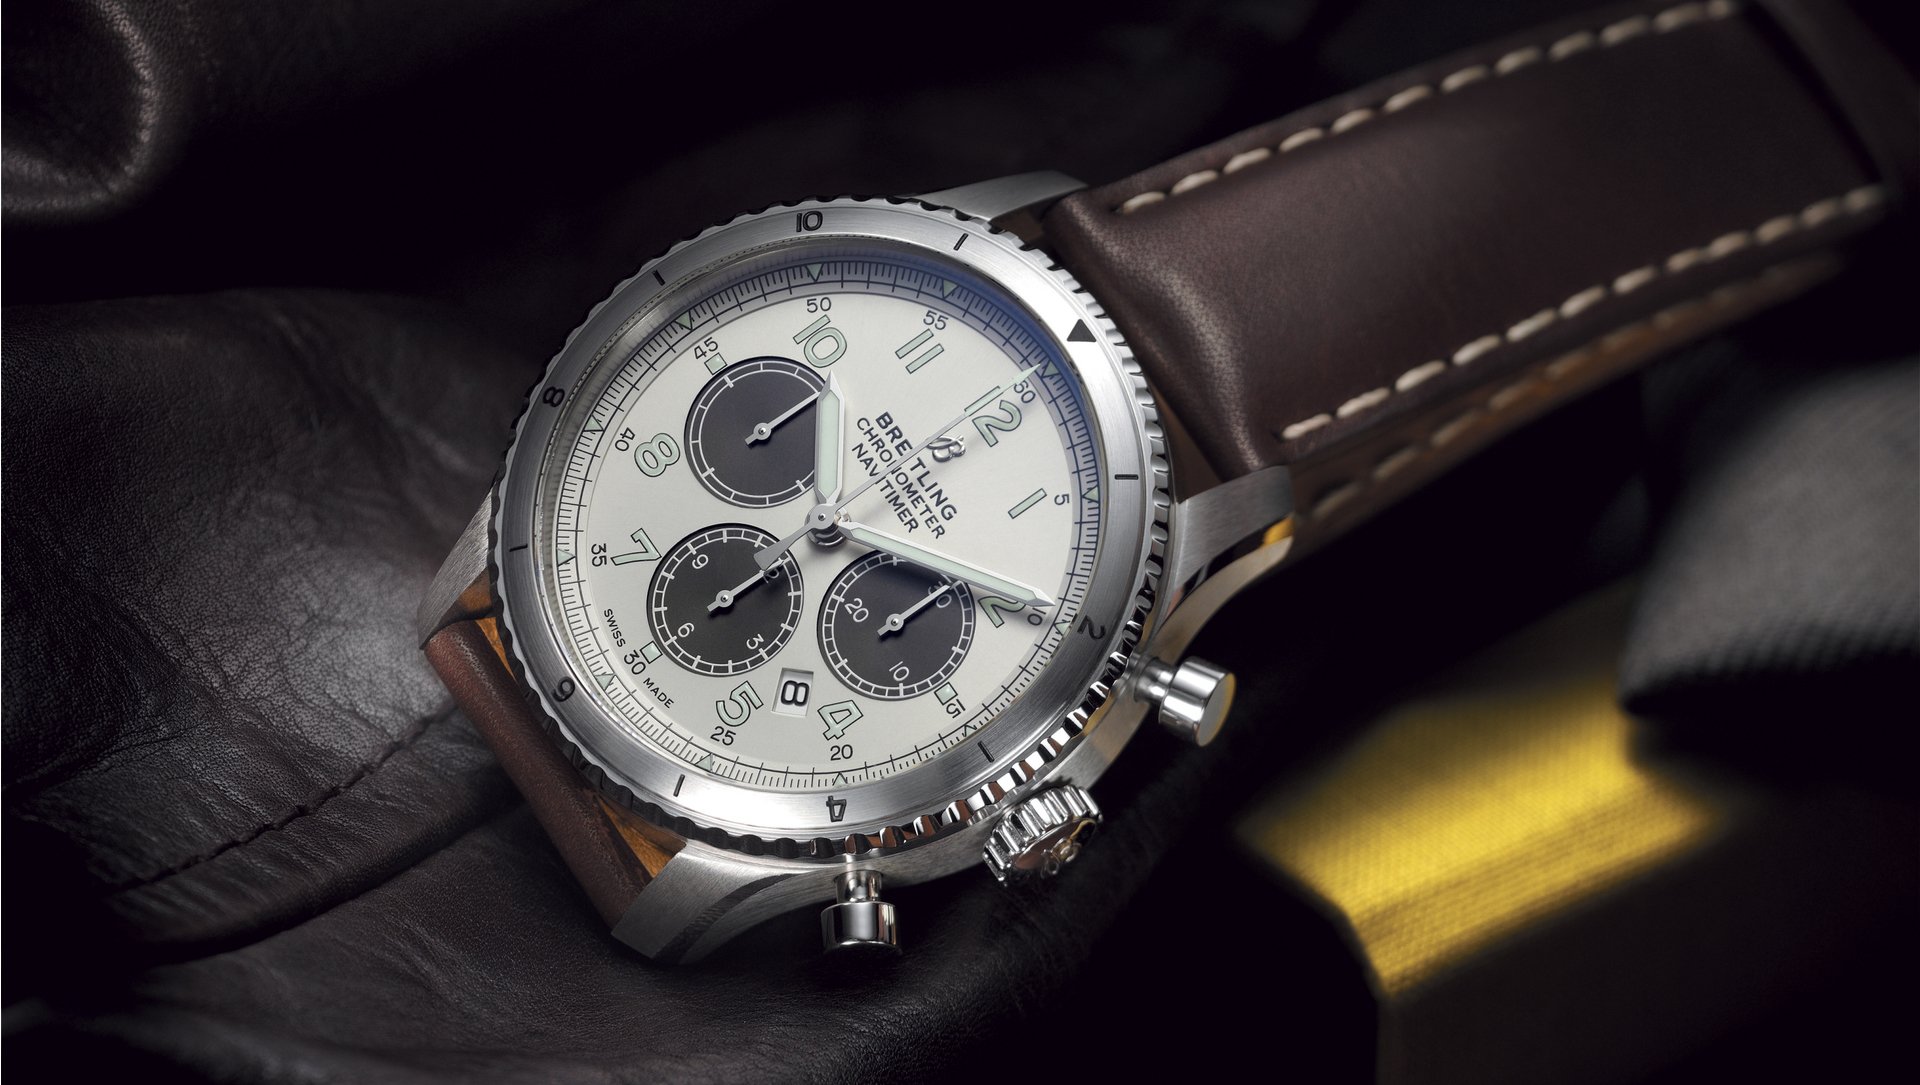 Fitted with the brown leather strap, the limited edition Breitling Navitimer looks gentle and reliable.